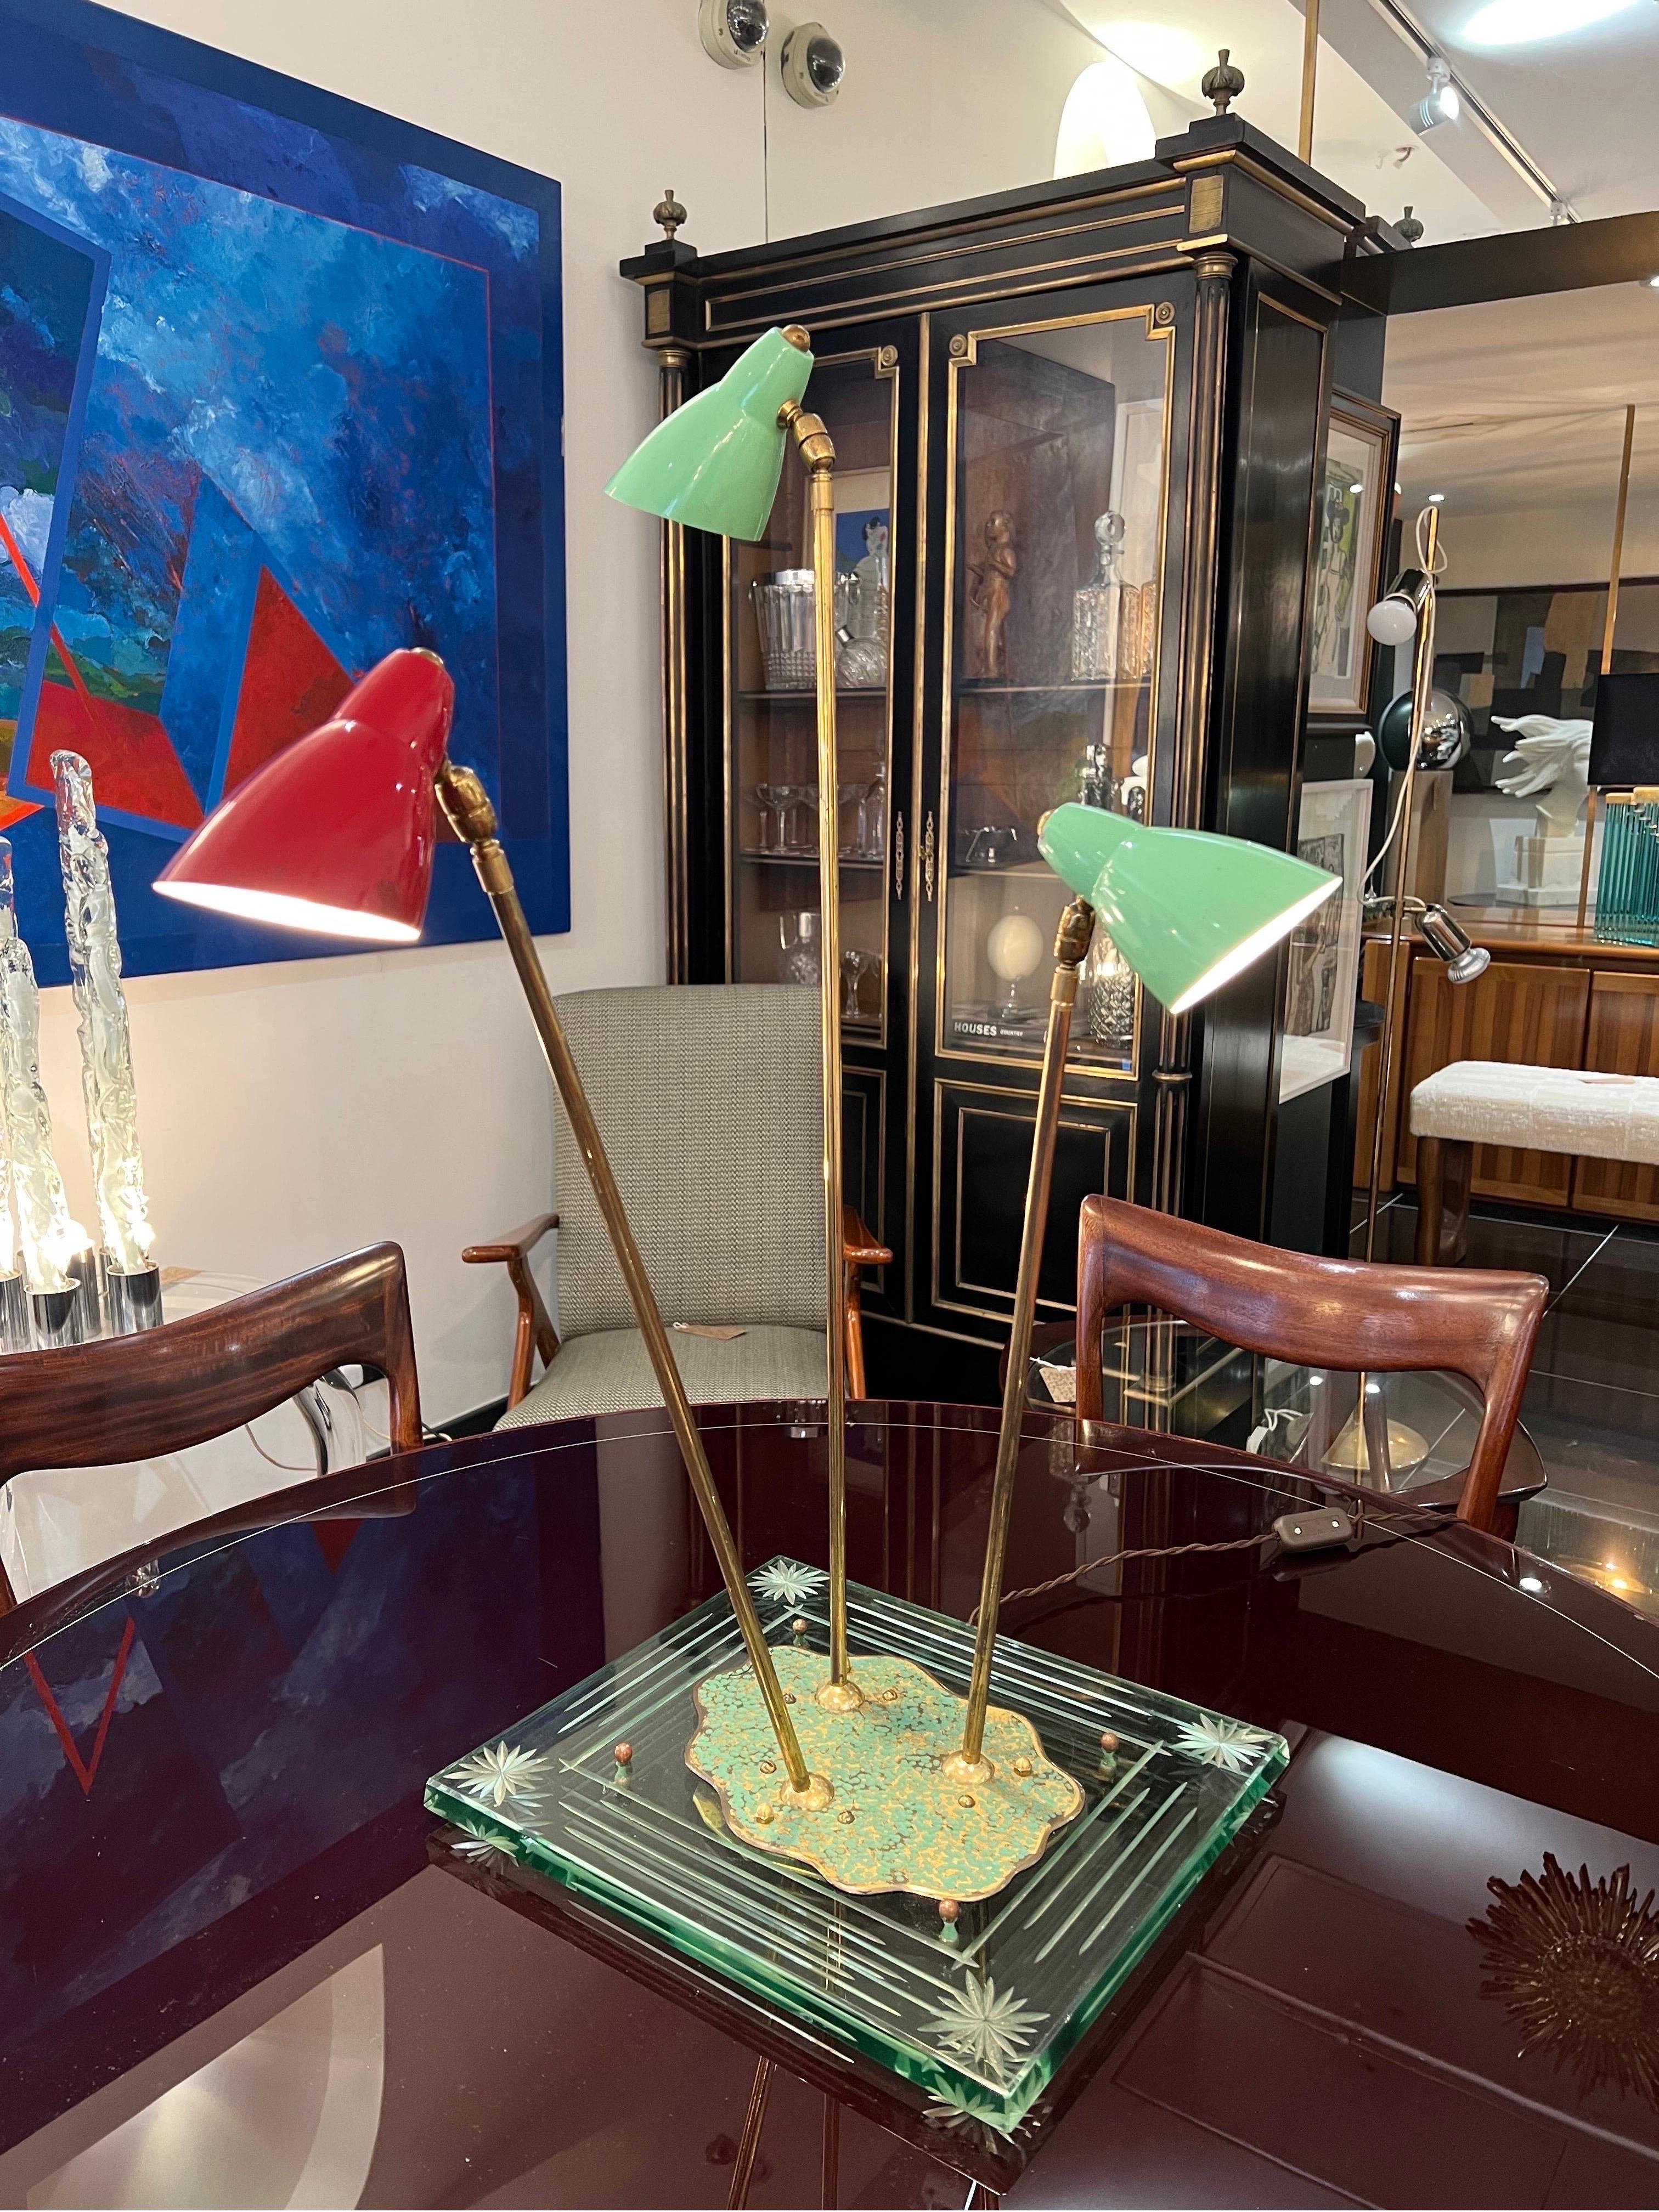 An extraordinary multidirectional & retractable table lamp consisting of 3 arms in brass with coloured Metal shades supported by beautifully designed glass base with etched motif. The lamp was produced in Italy in the 1950s. In perfect working